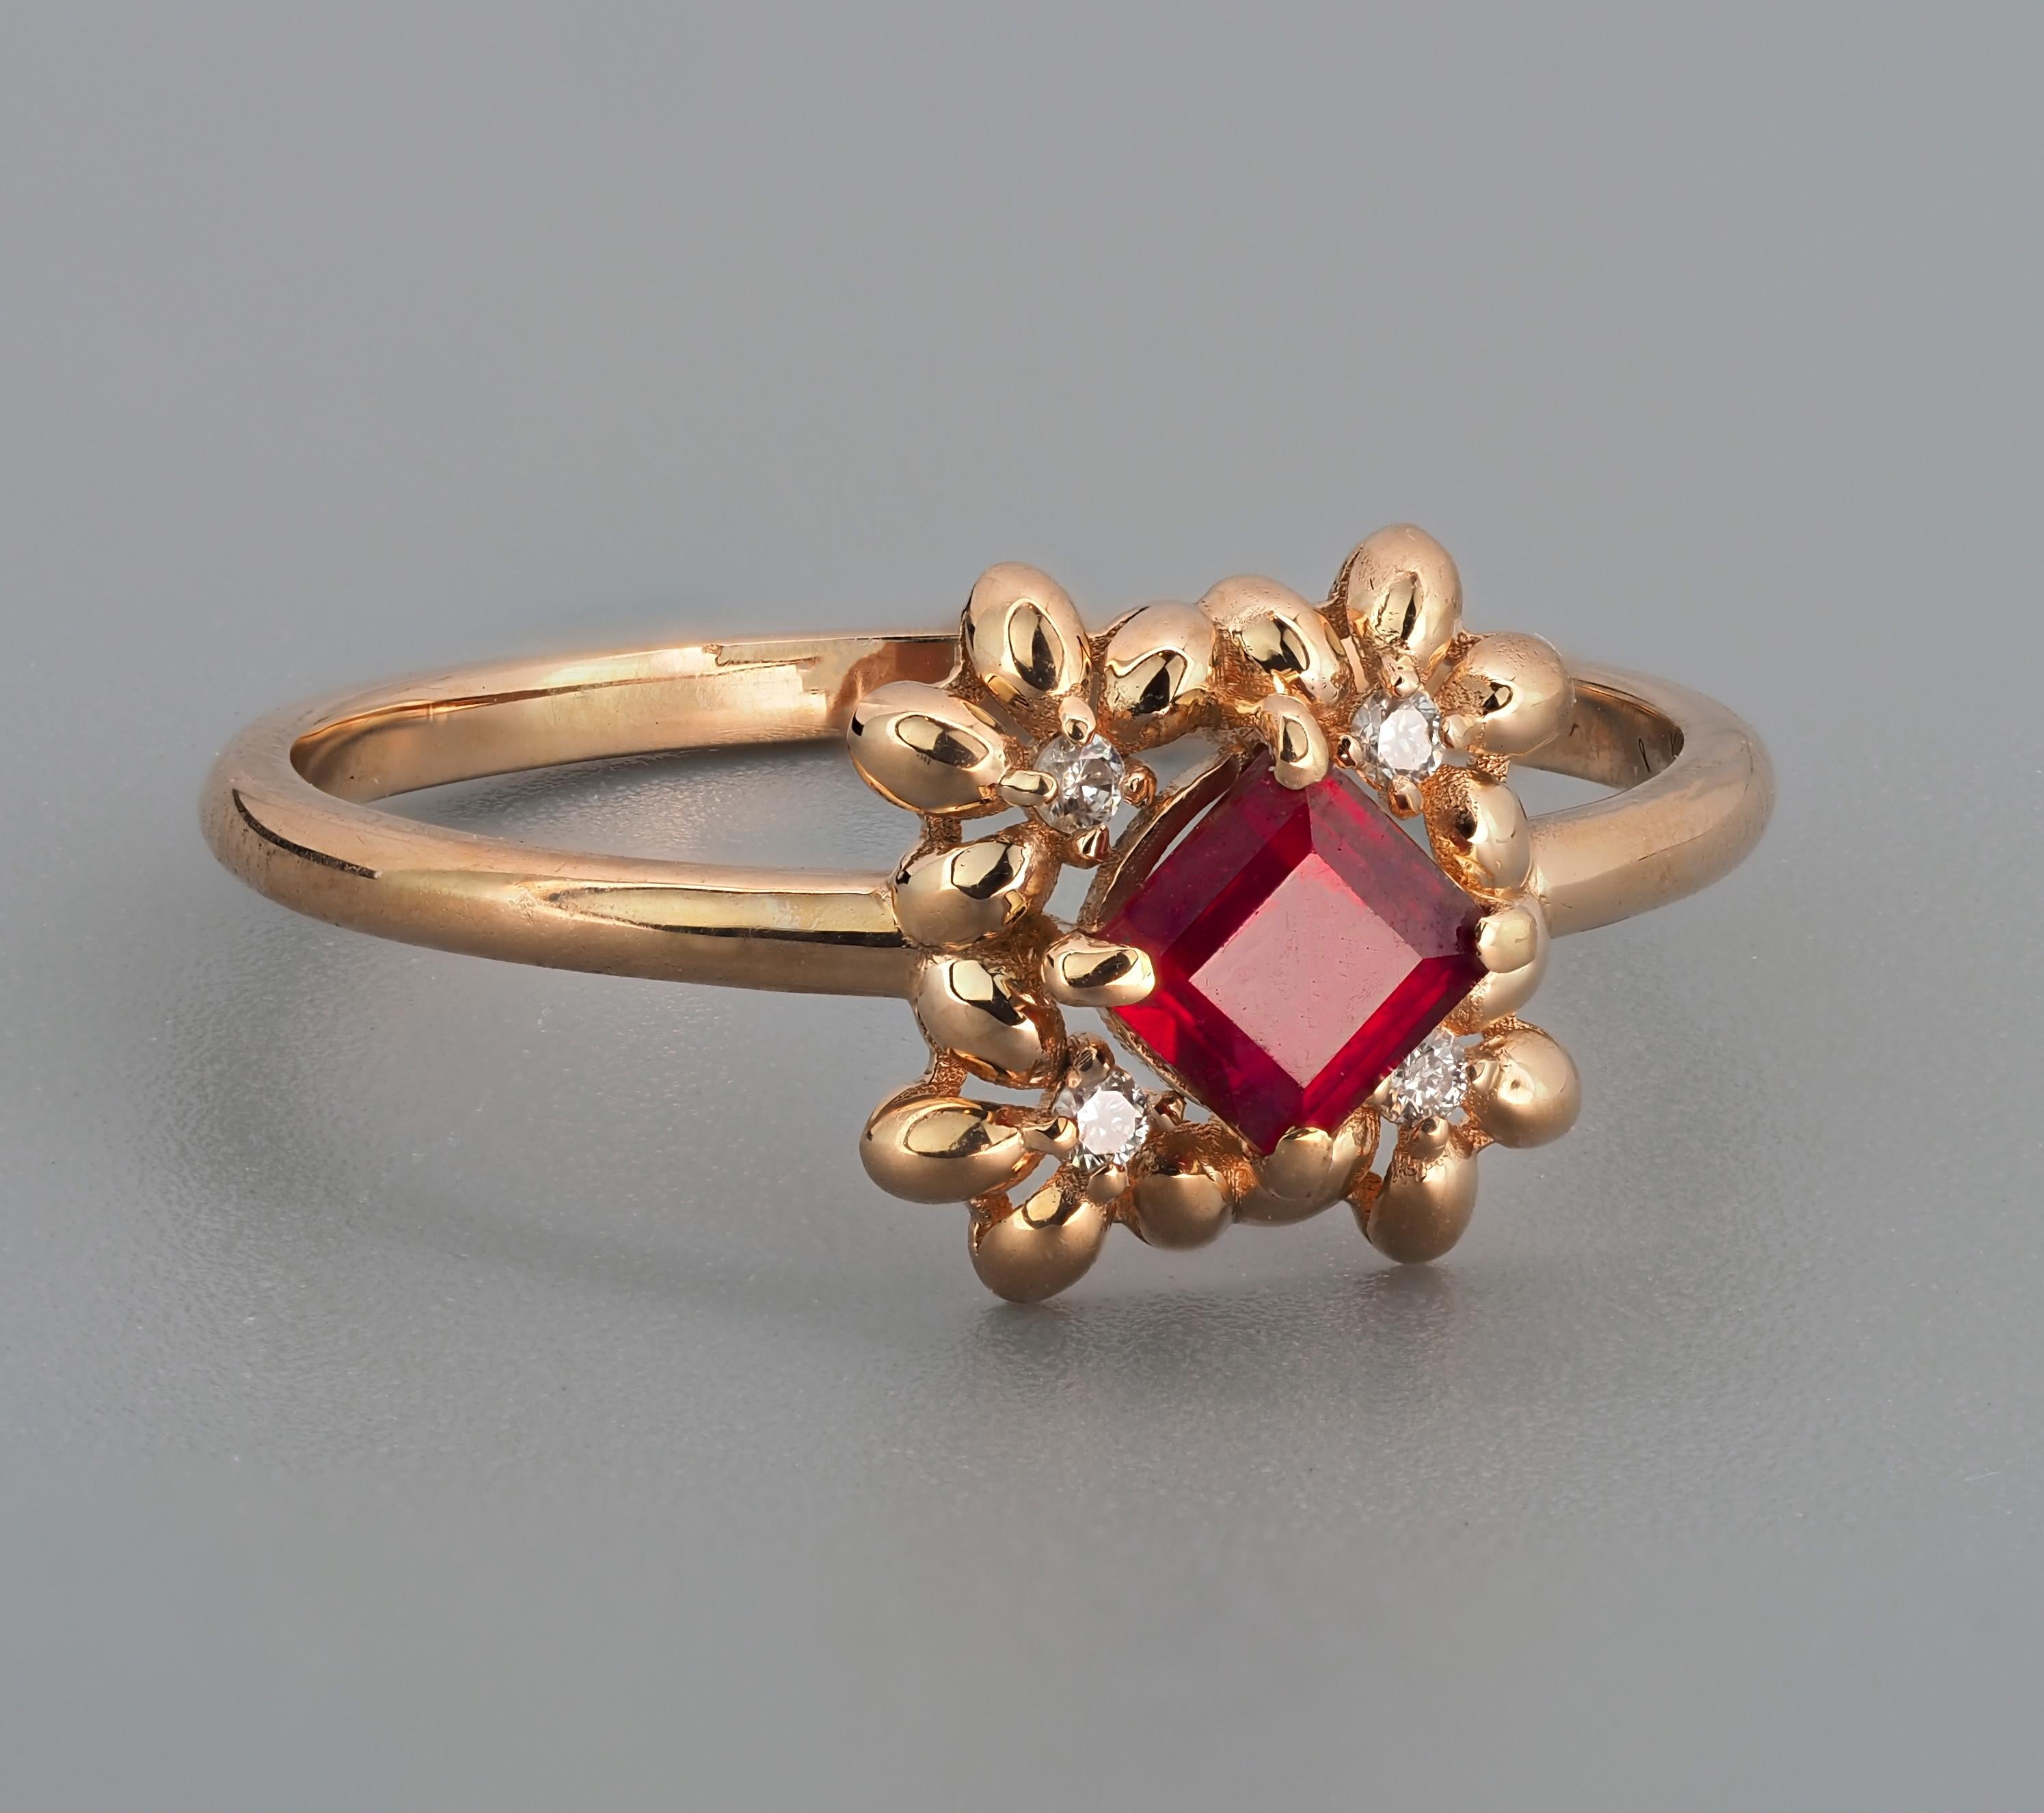 For Sale:  14 karat Gold Ring with Ruby and Diamonds 2